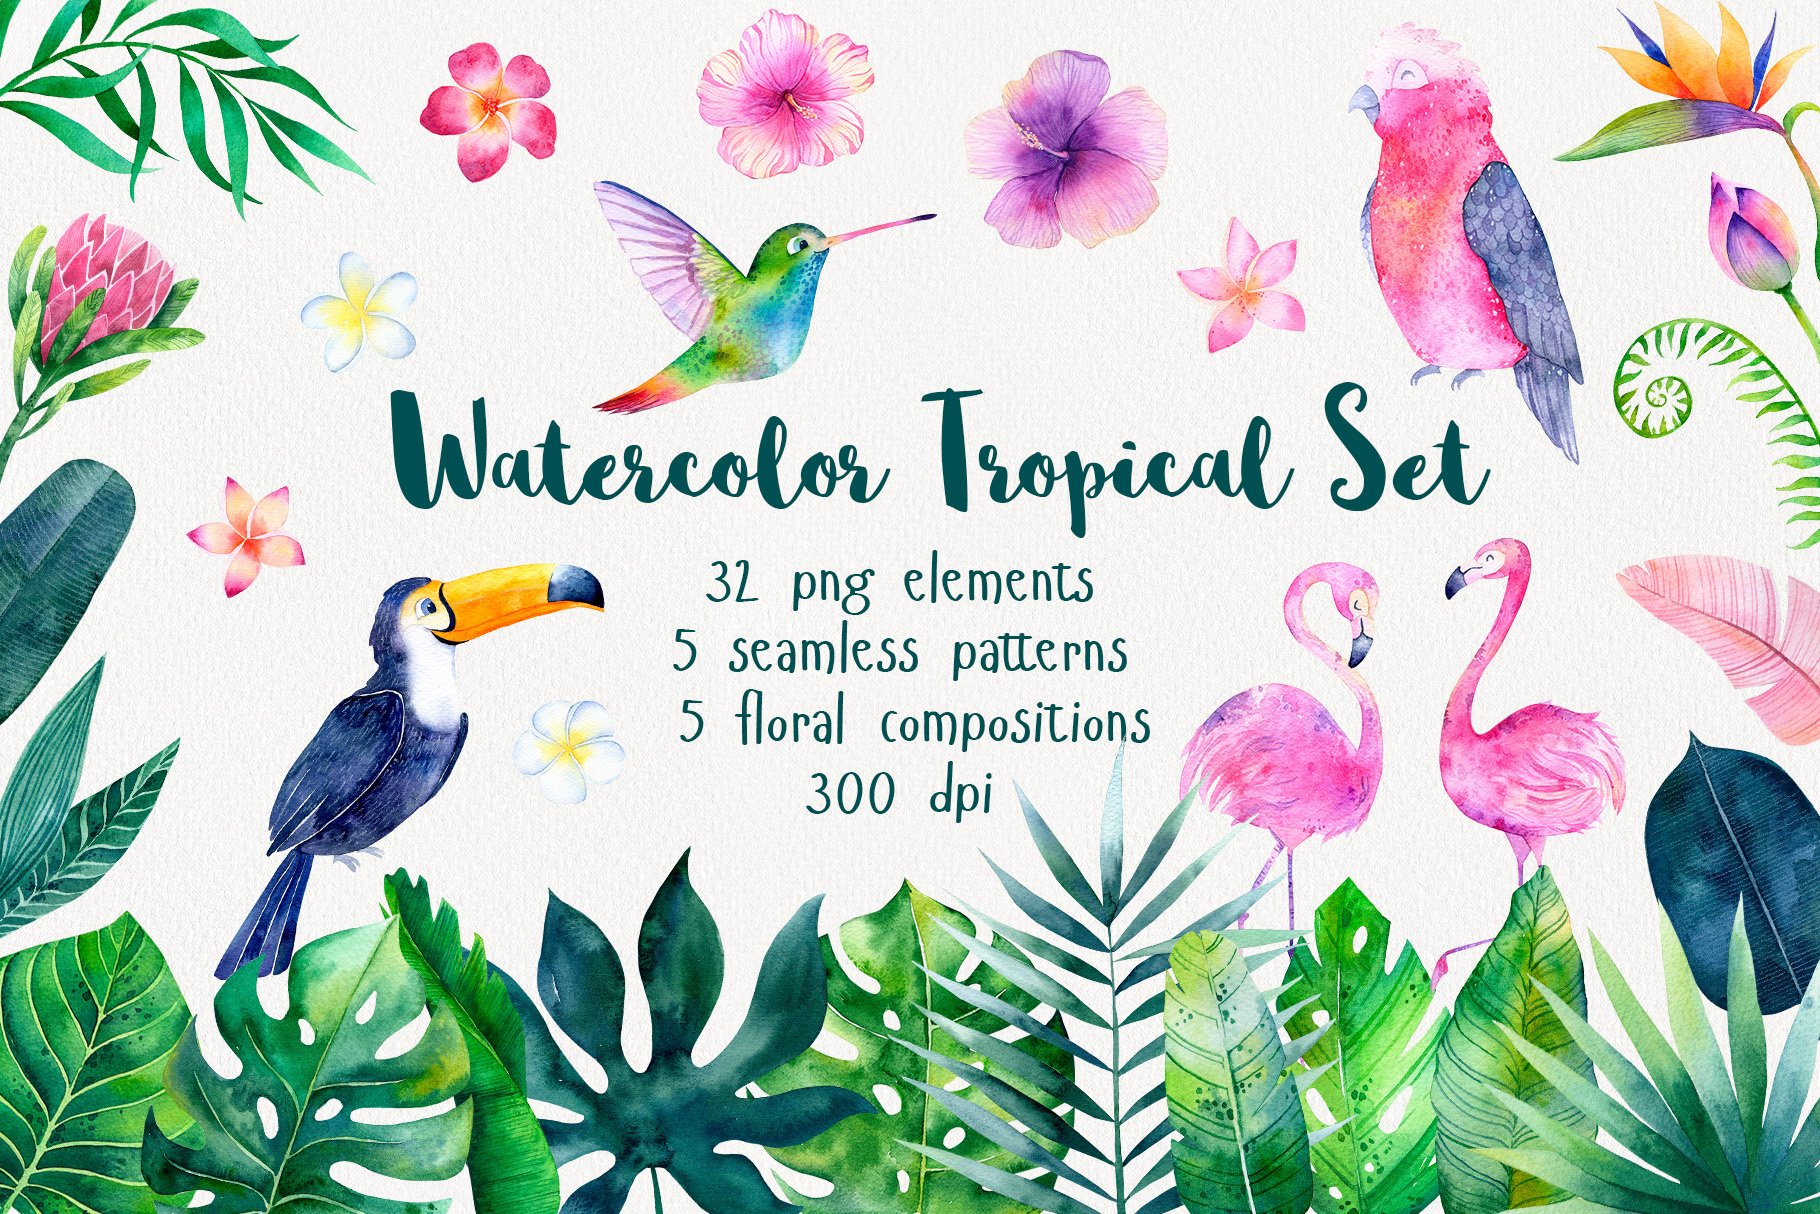 Watercolor Tropical Set cover image.